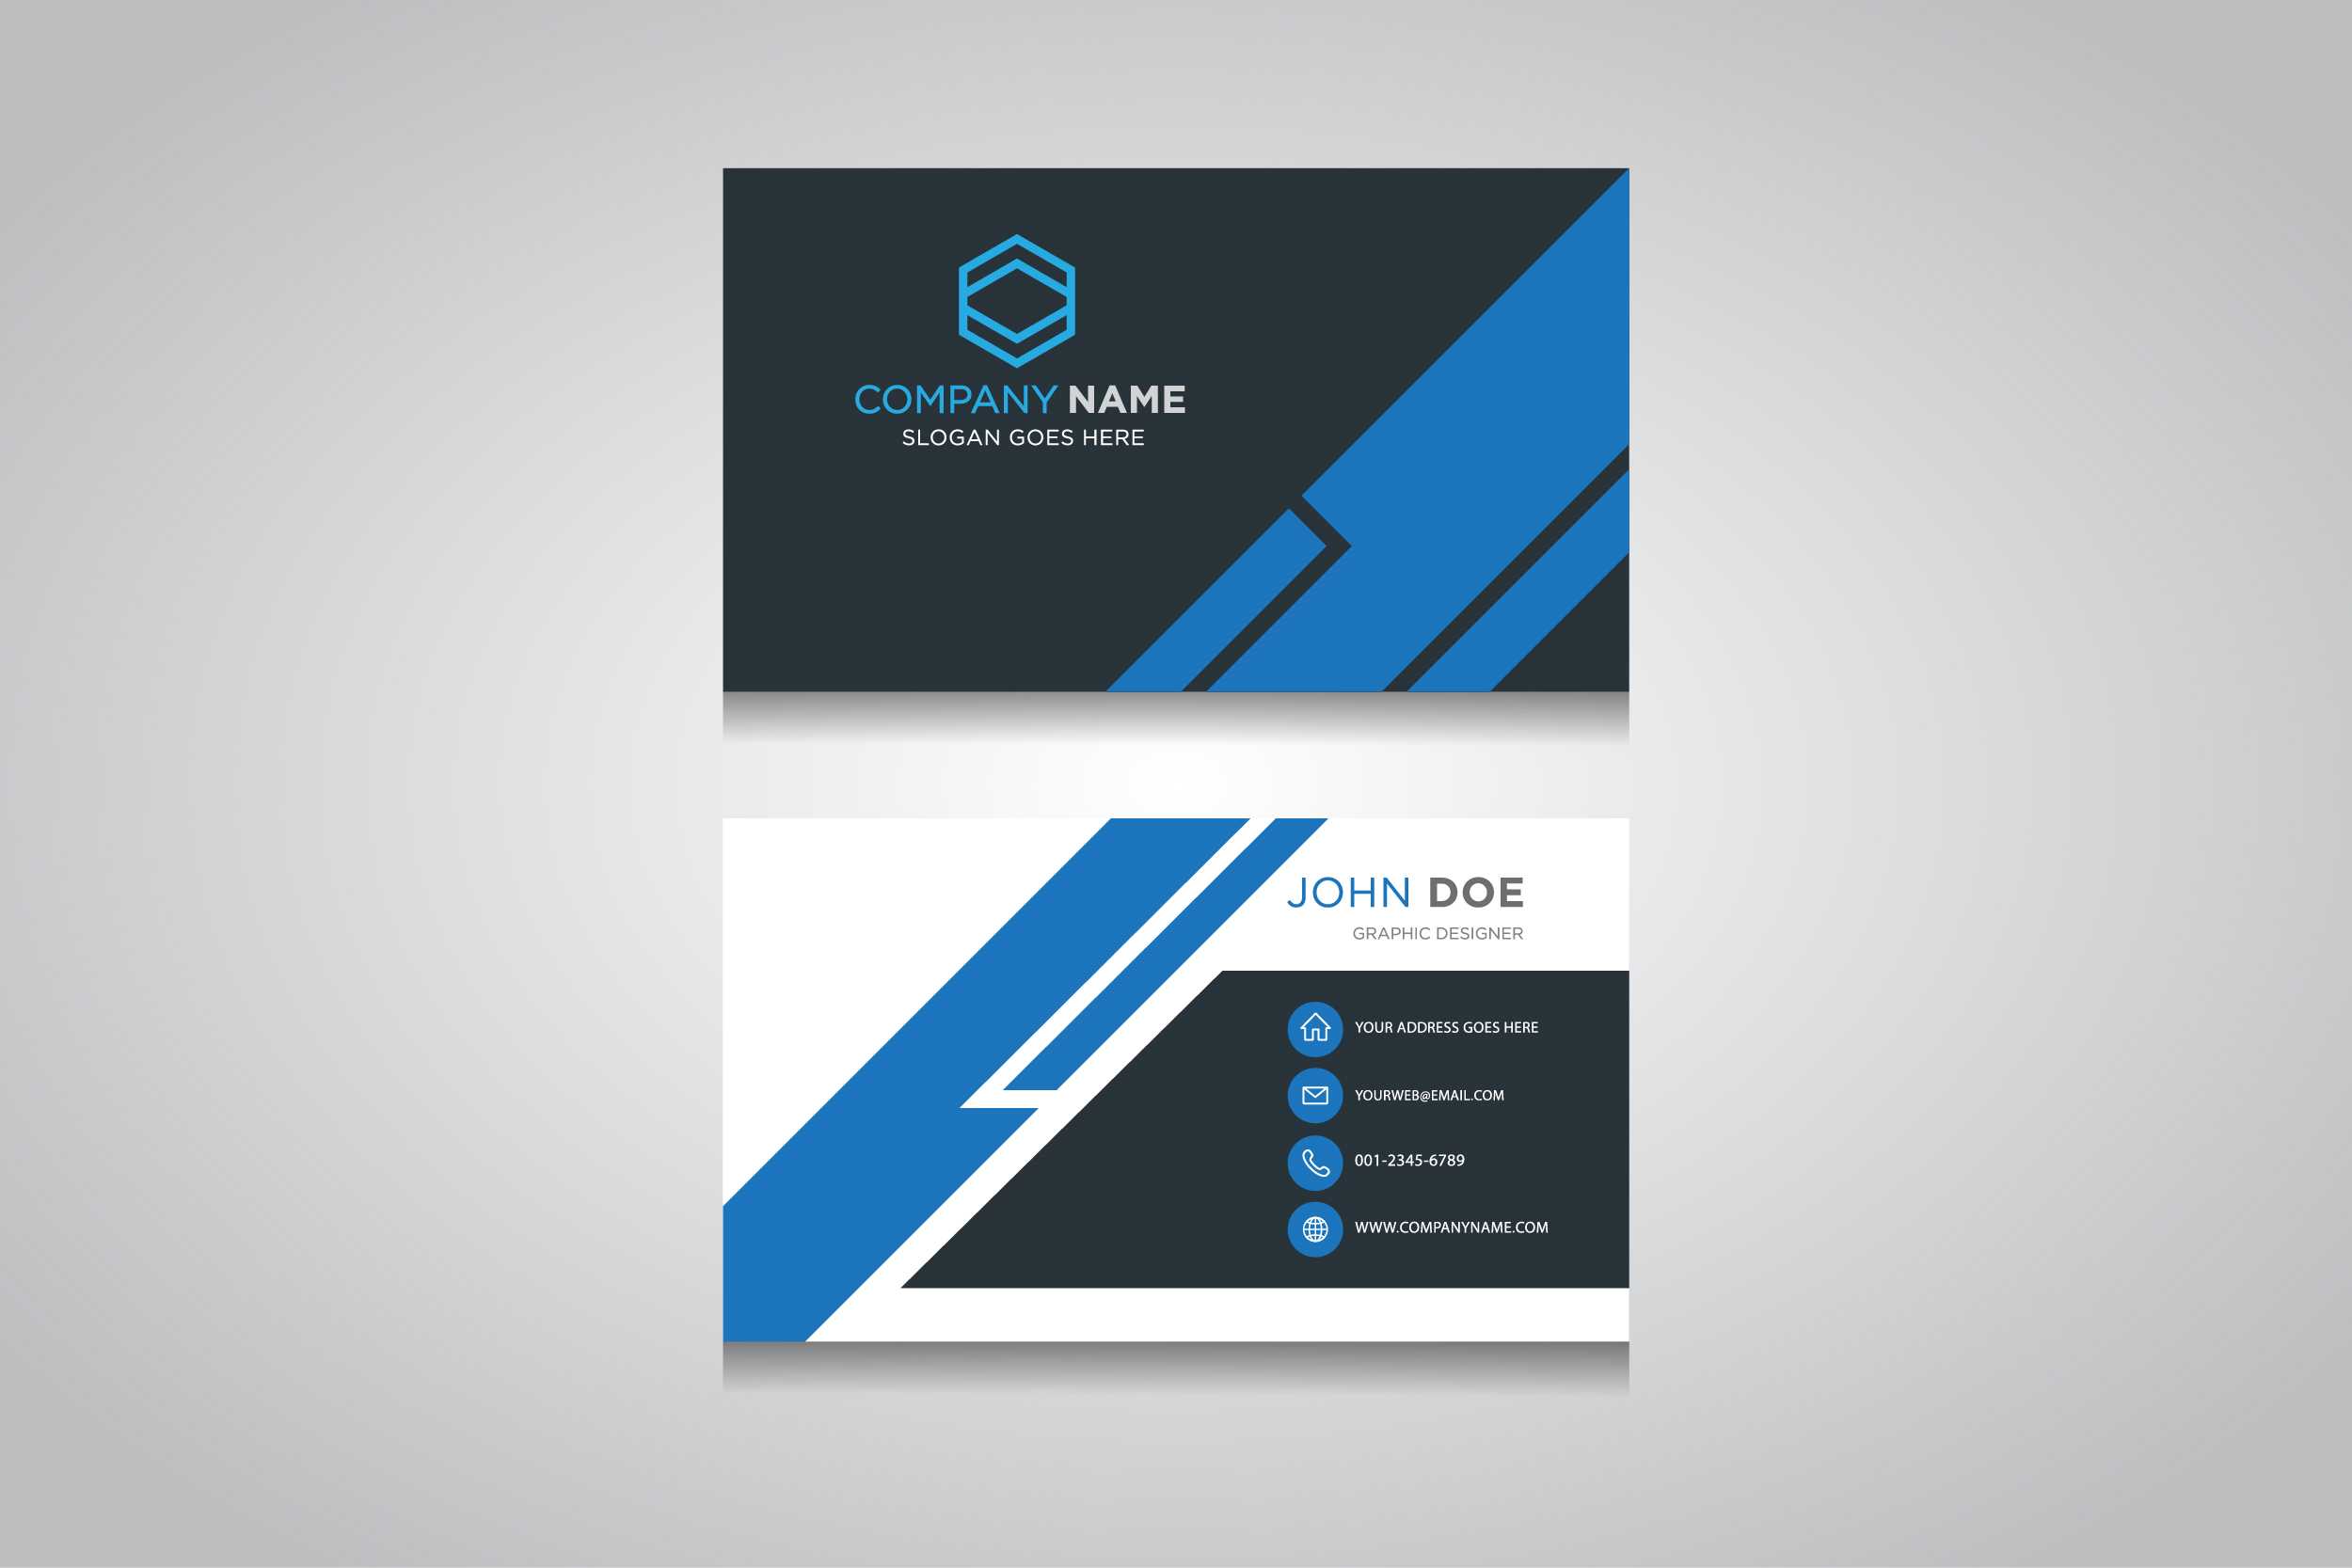 Business Card Template. Creative Business Card Pertaining To Web Design Business Cards Templates